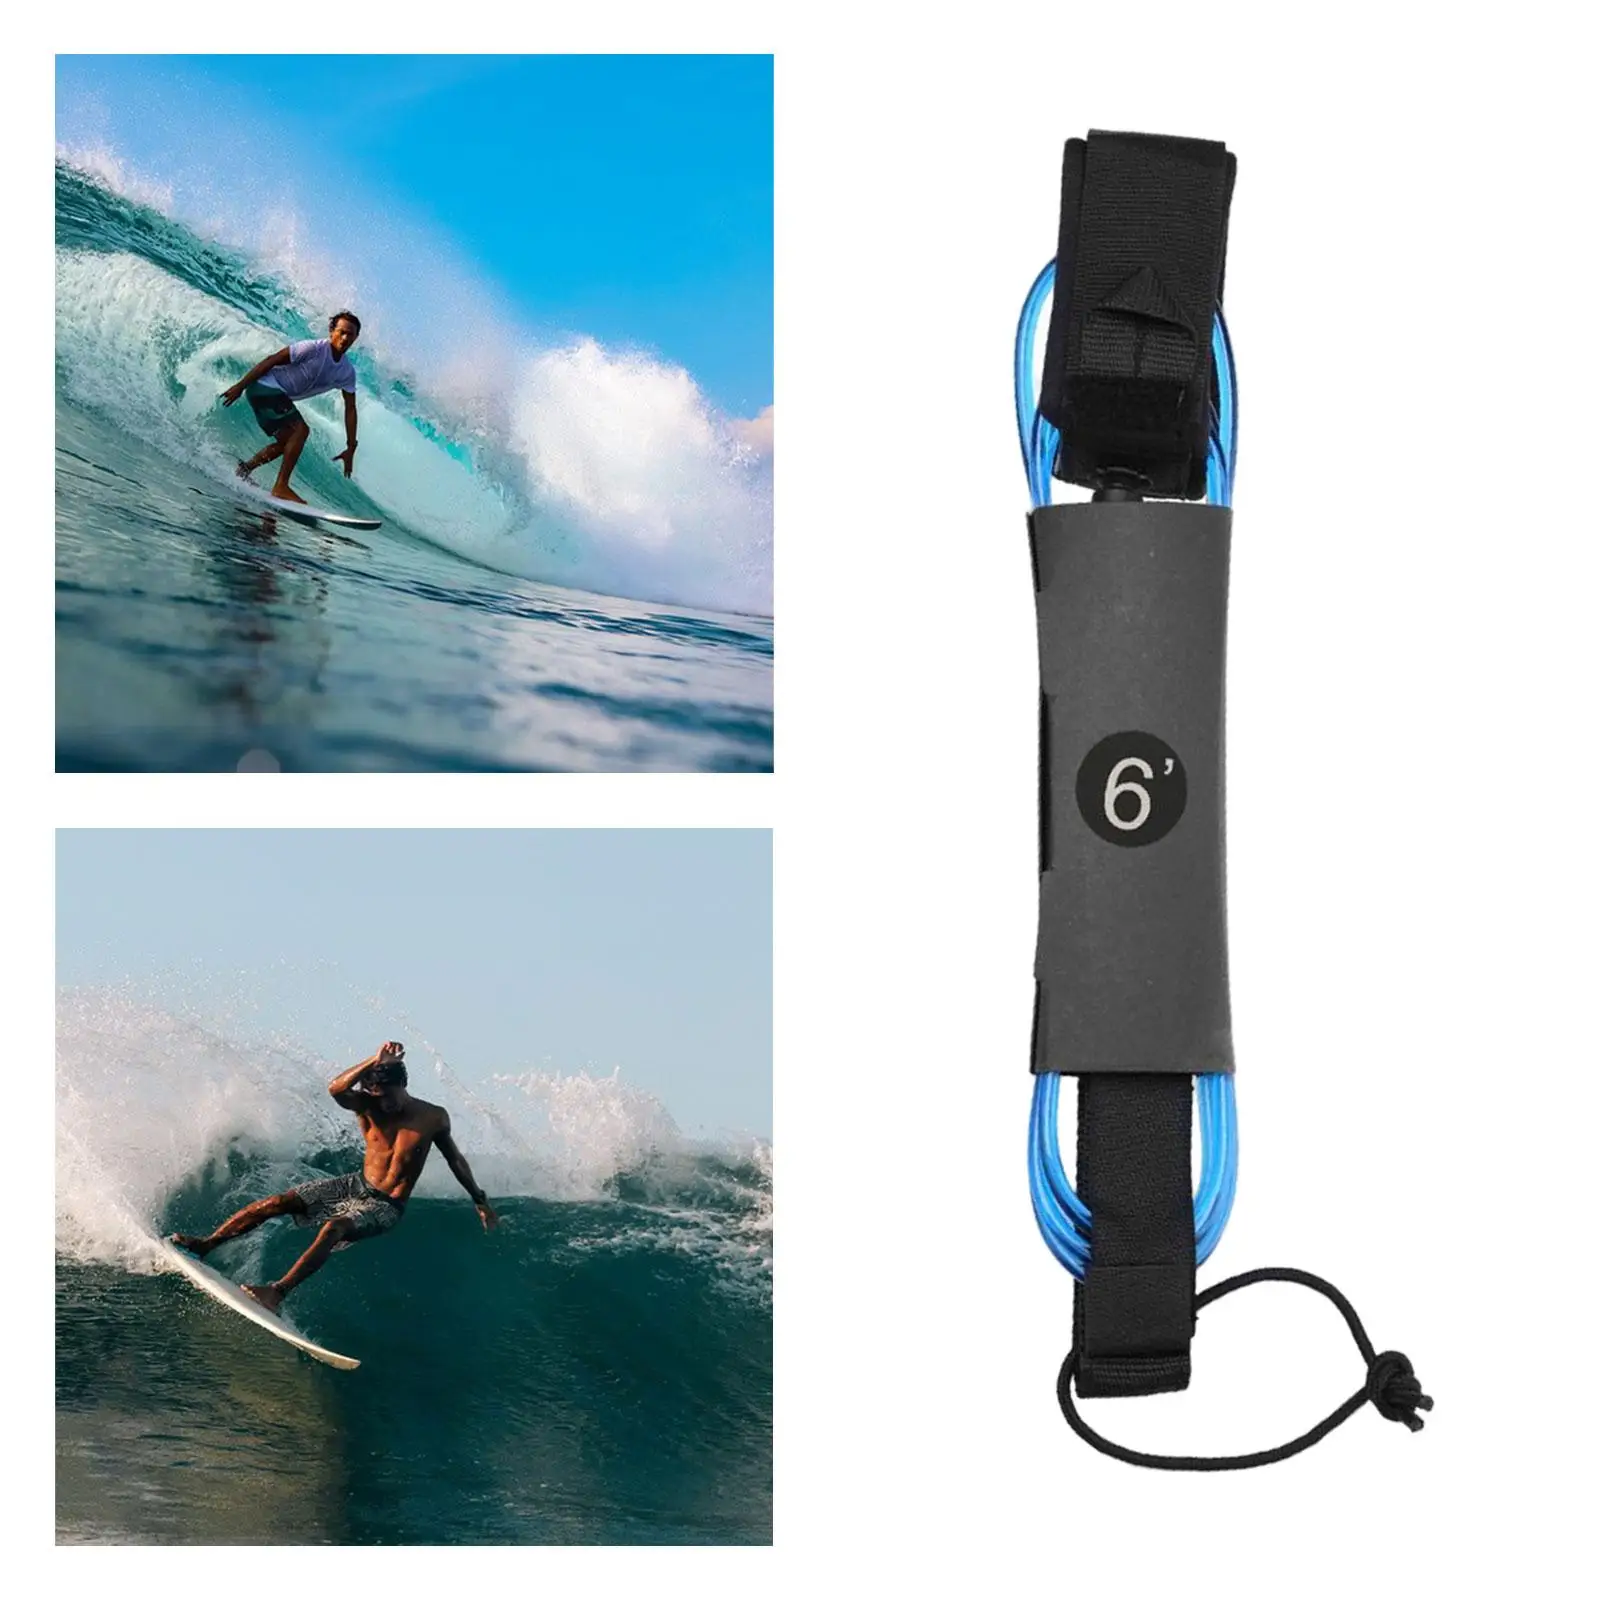 Surfboard Leash, TPU Surf Leashes, Adjustable Stand Up Surfing Ankle Strap Leg Rope for Surfboard Paddleboard Canoe Boat